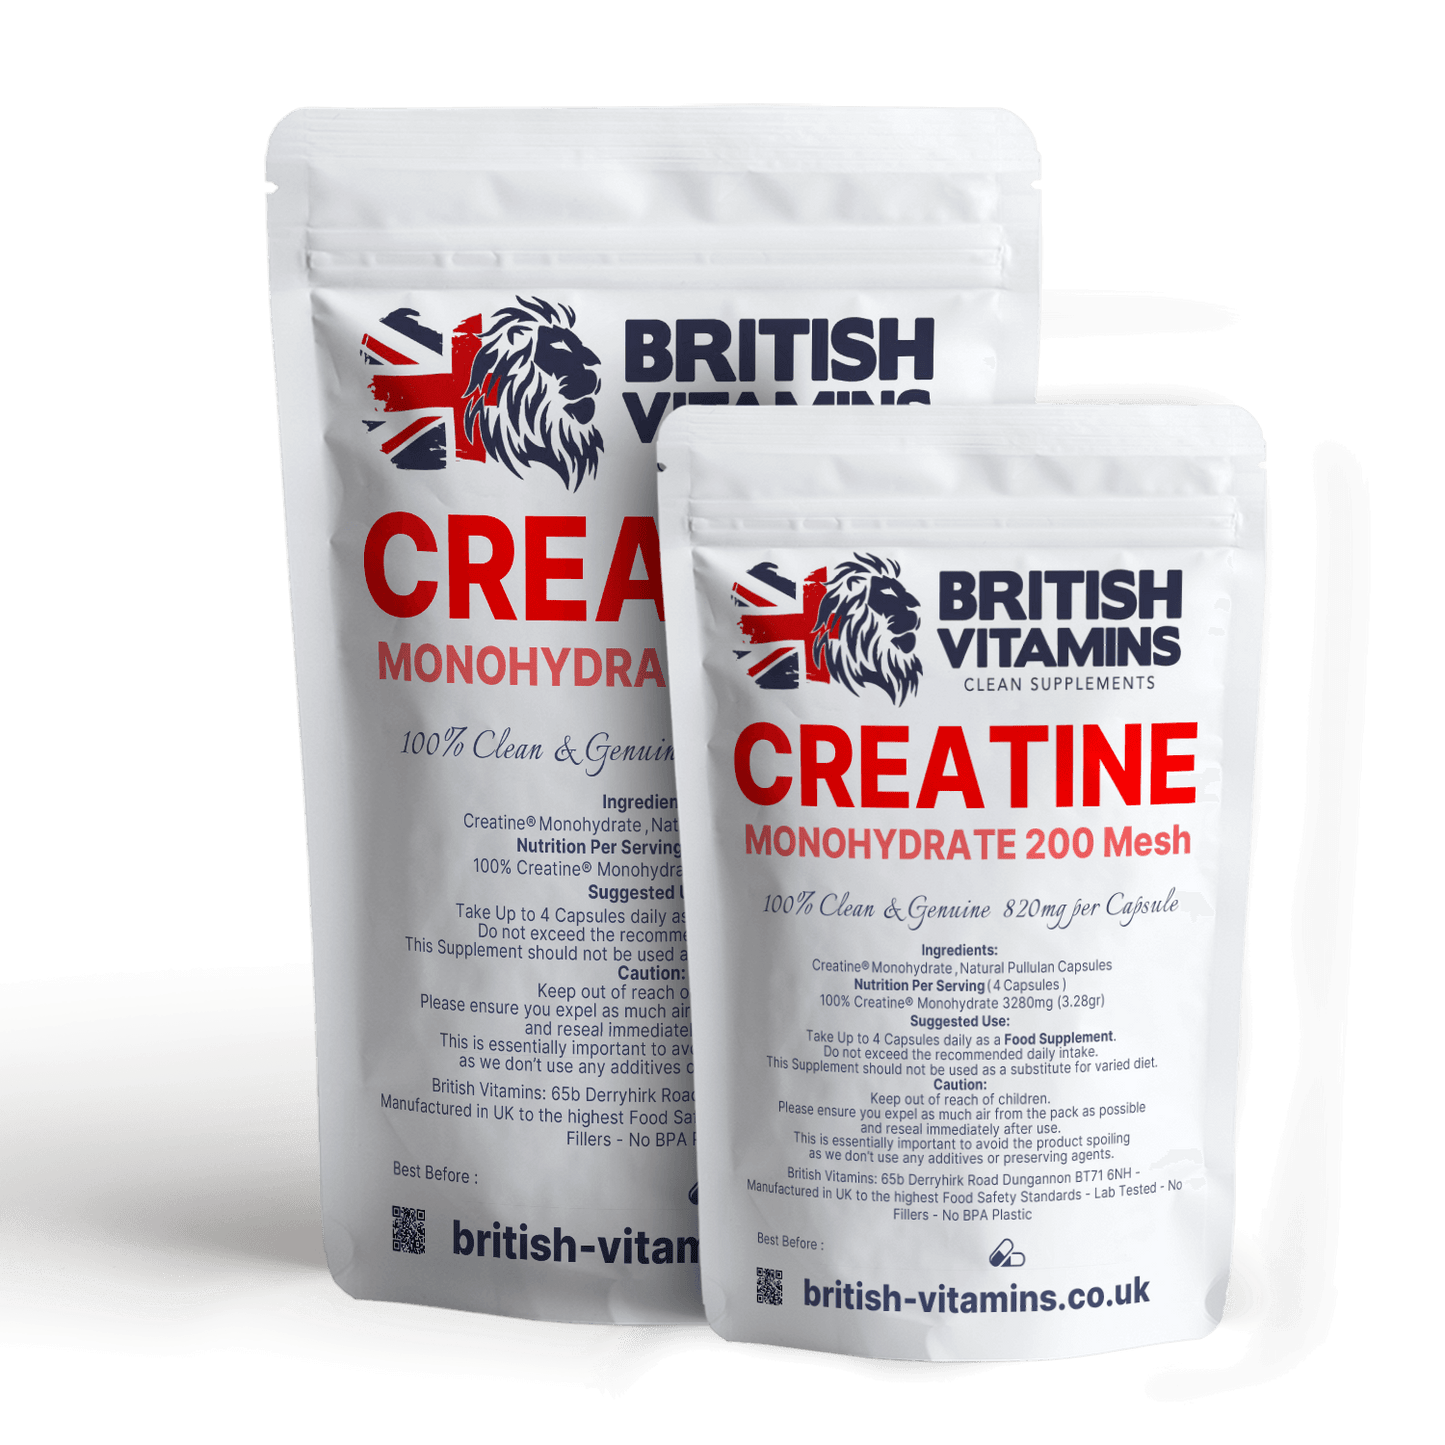 Creatine Monohydrate Capsules 3280mg Serving Health & Beauty:Vitamins & Lifestyle Supplements:Sports Supplements:Protein Shakes & Bodybuilding British Vitamins 60 capsules  